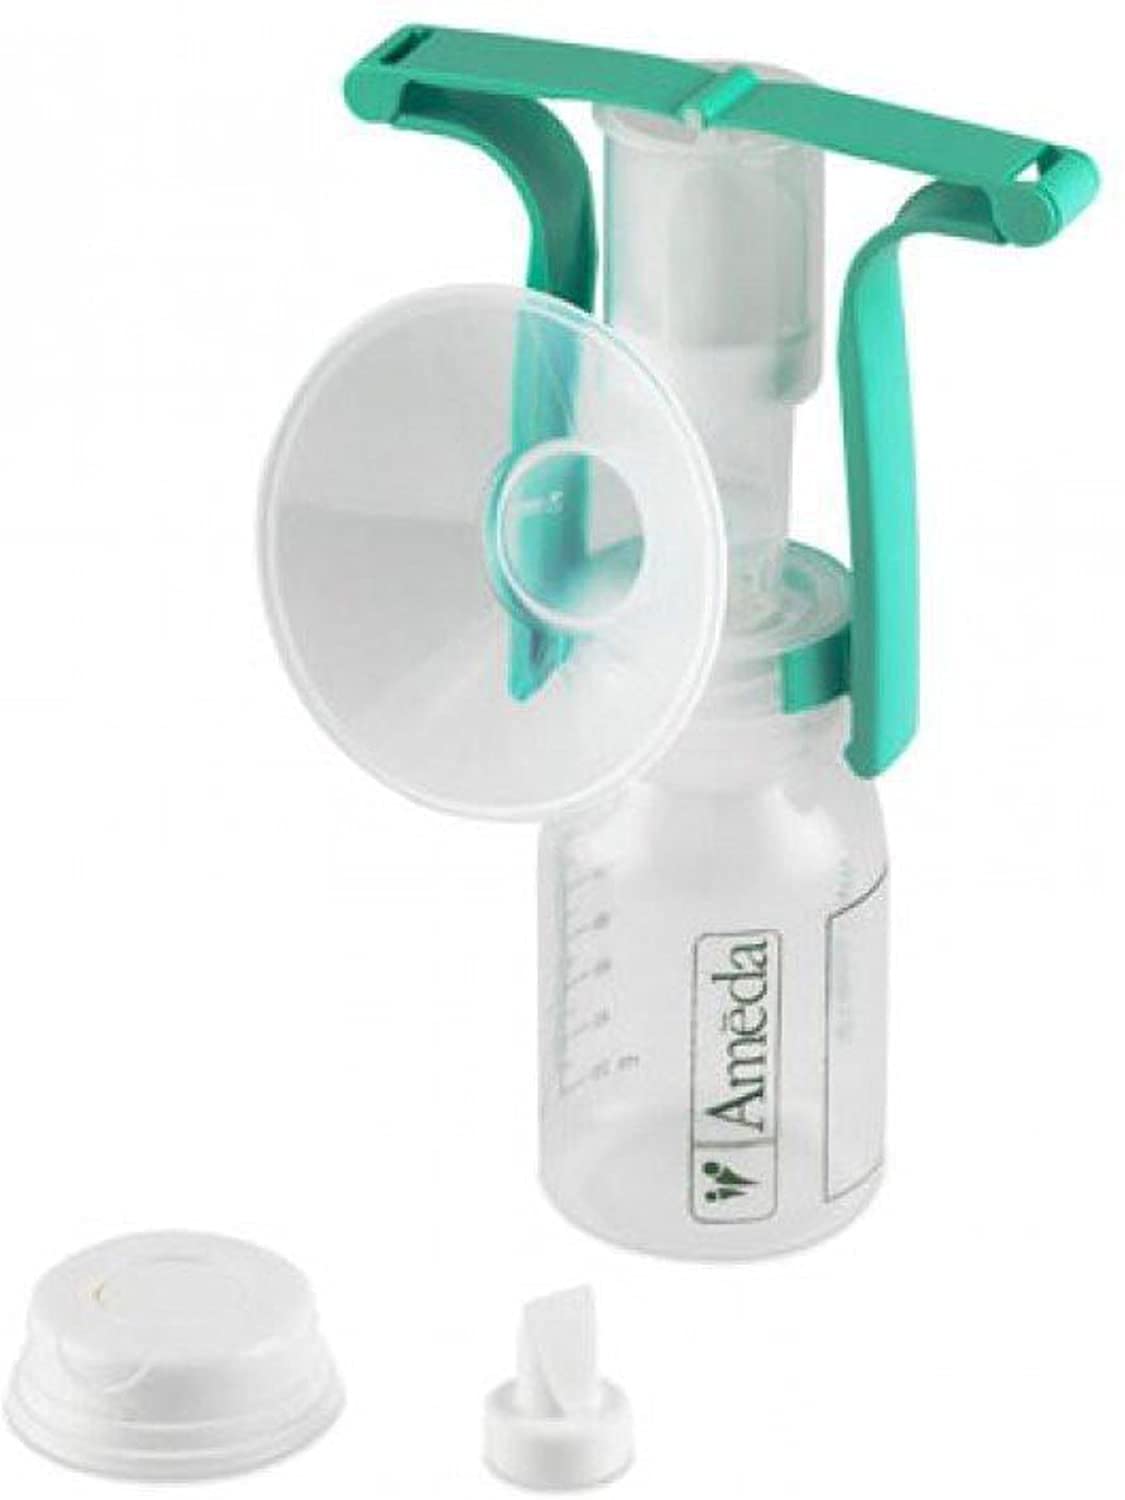 Ameda 17152 - One-Hand Breast Pump/Dual Hygienikit Collection - image 2 of 2